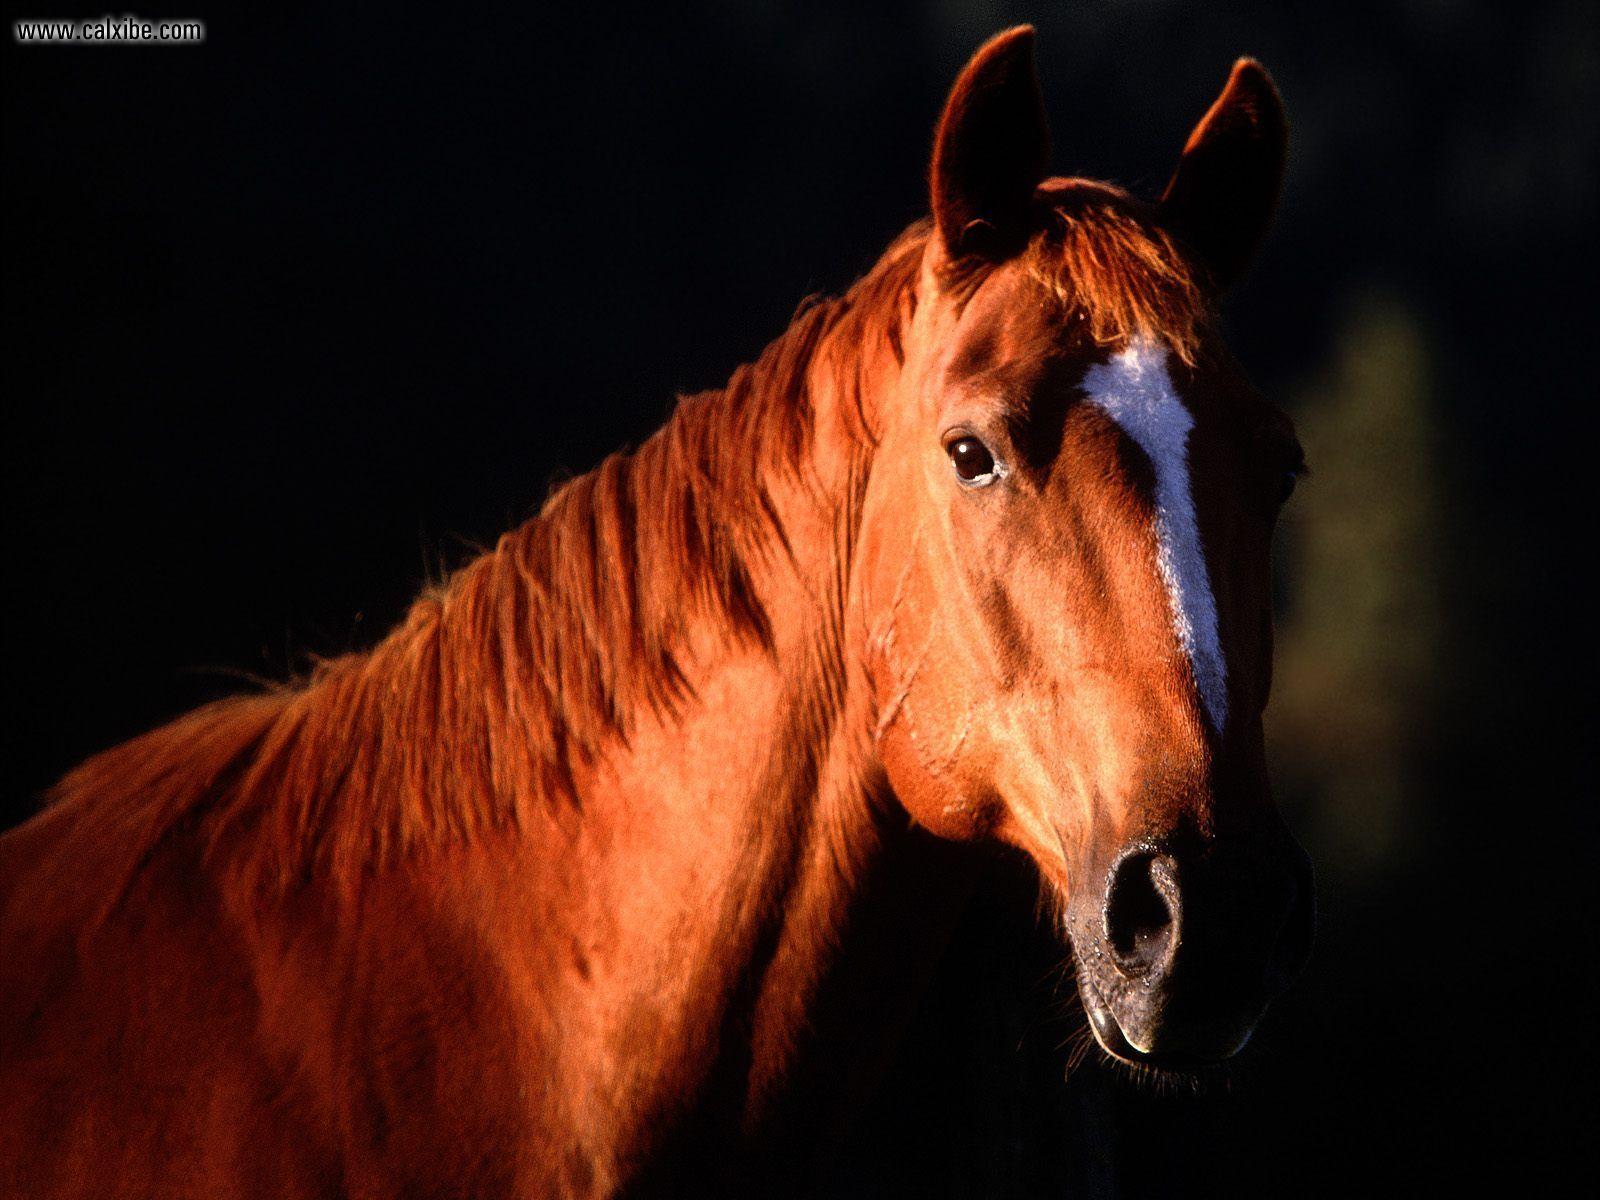 Animals Zoo Park: Horse Wallpaper, Photo, Picture